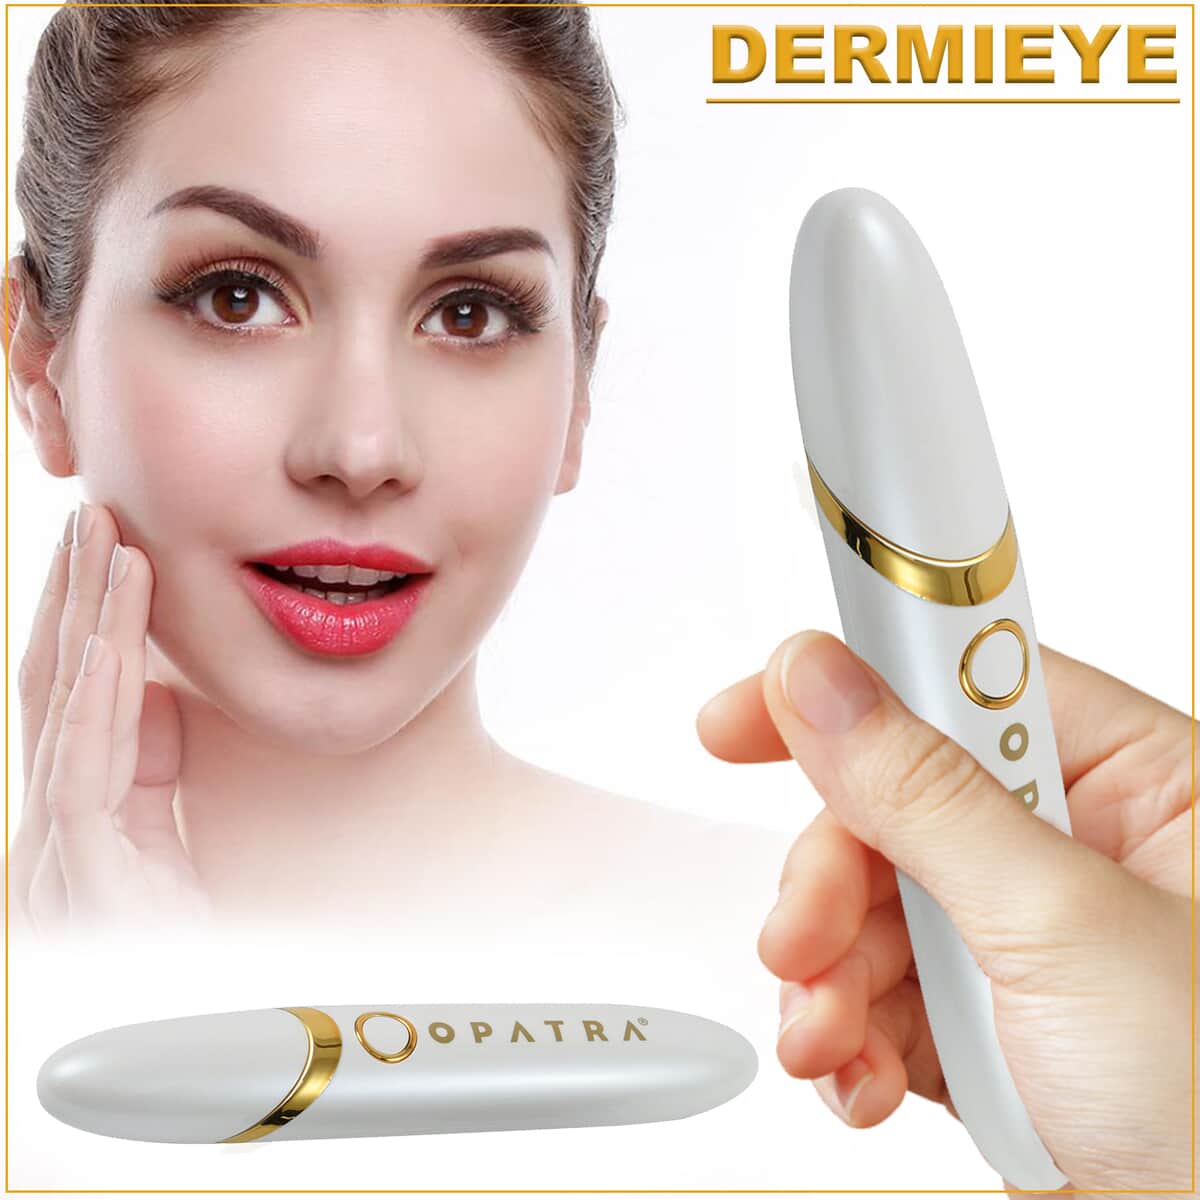 Opatra DermiEye Plus with Massage, Heat & LED Light Therapy (Lifetime Warranty) image number 1